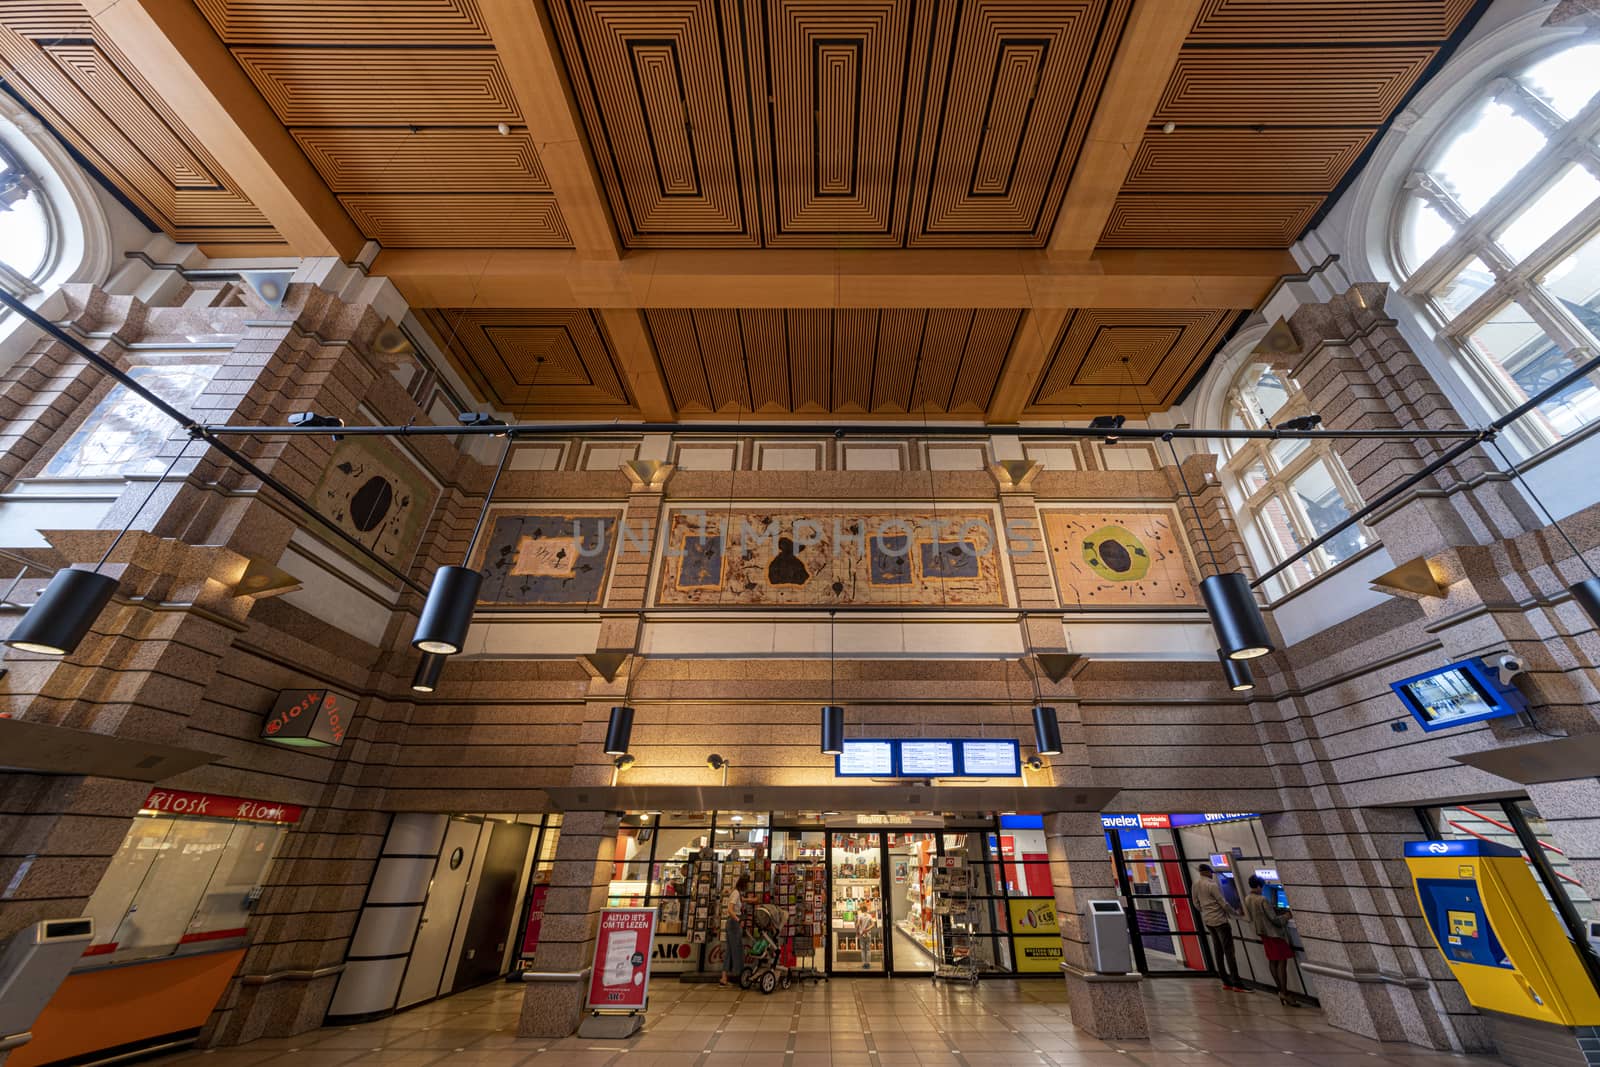 THE HAGUE, 10 June 2019 - Entrance and ceiling of the 'art deco' style of Den Haag train station by ankorlight